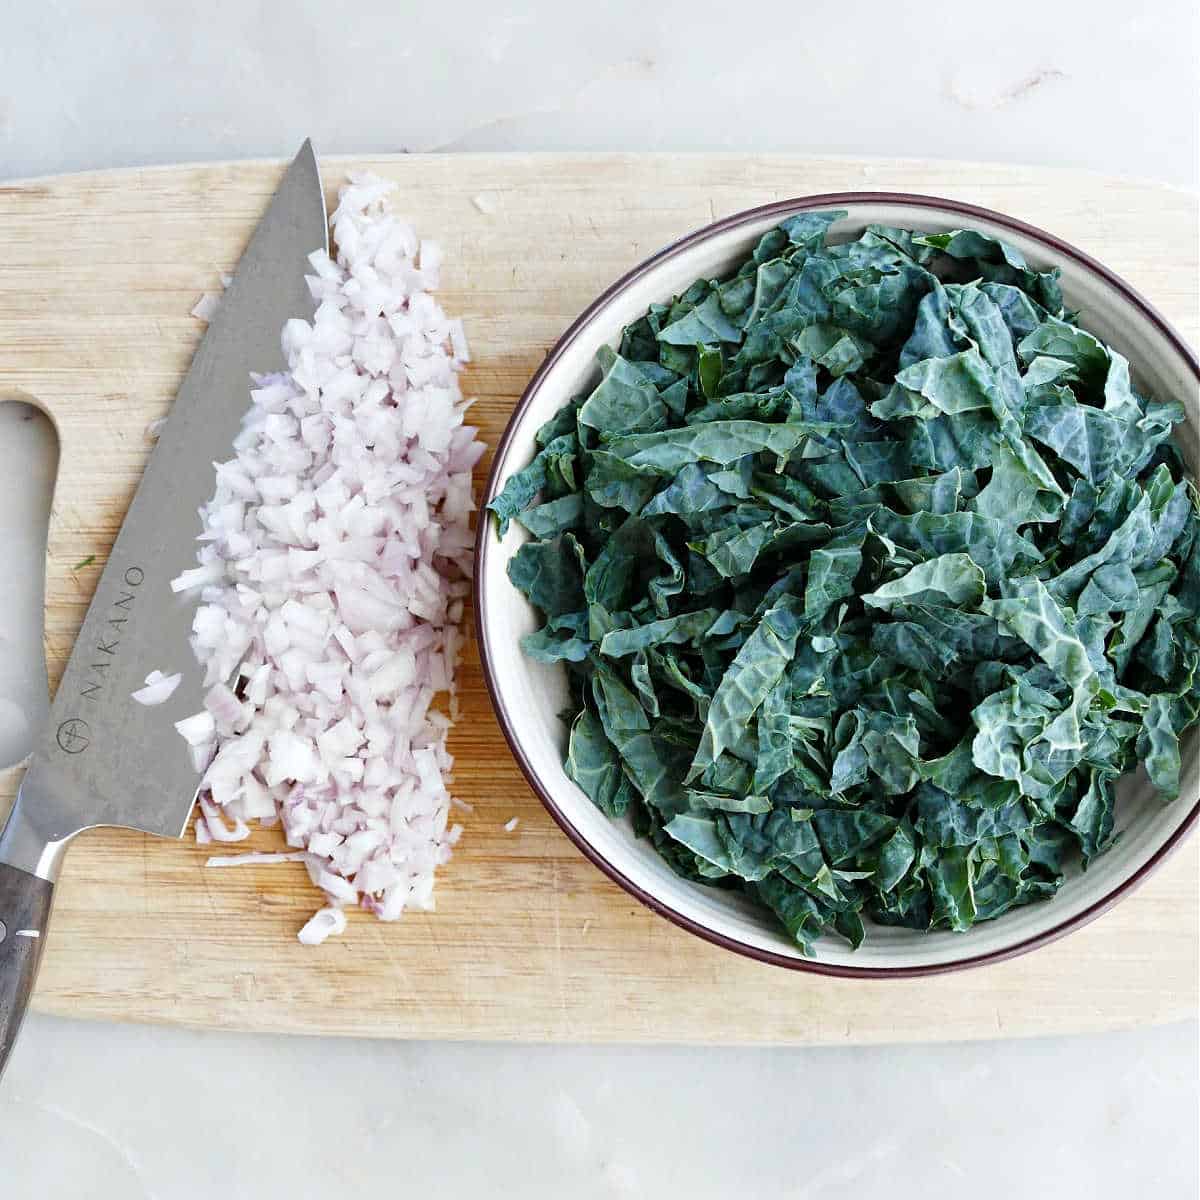 diced shallots and chopped kale on a cutting board next to chef's knife